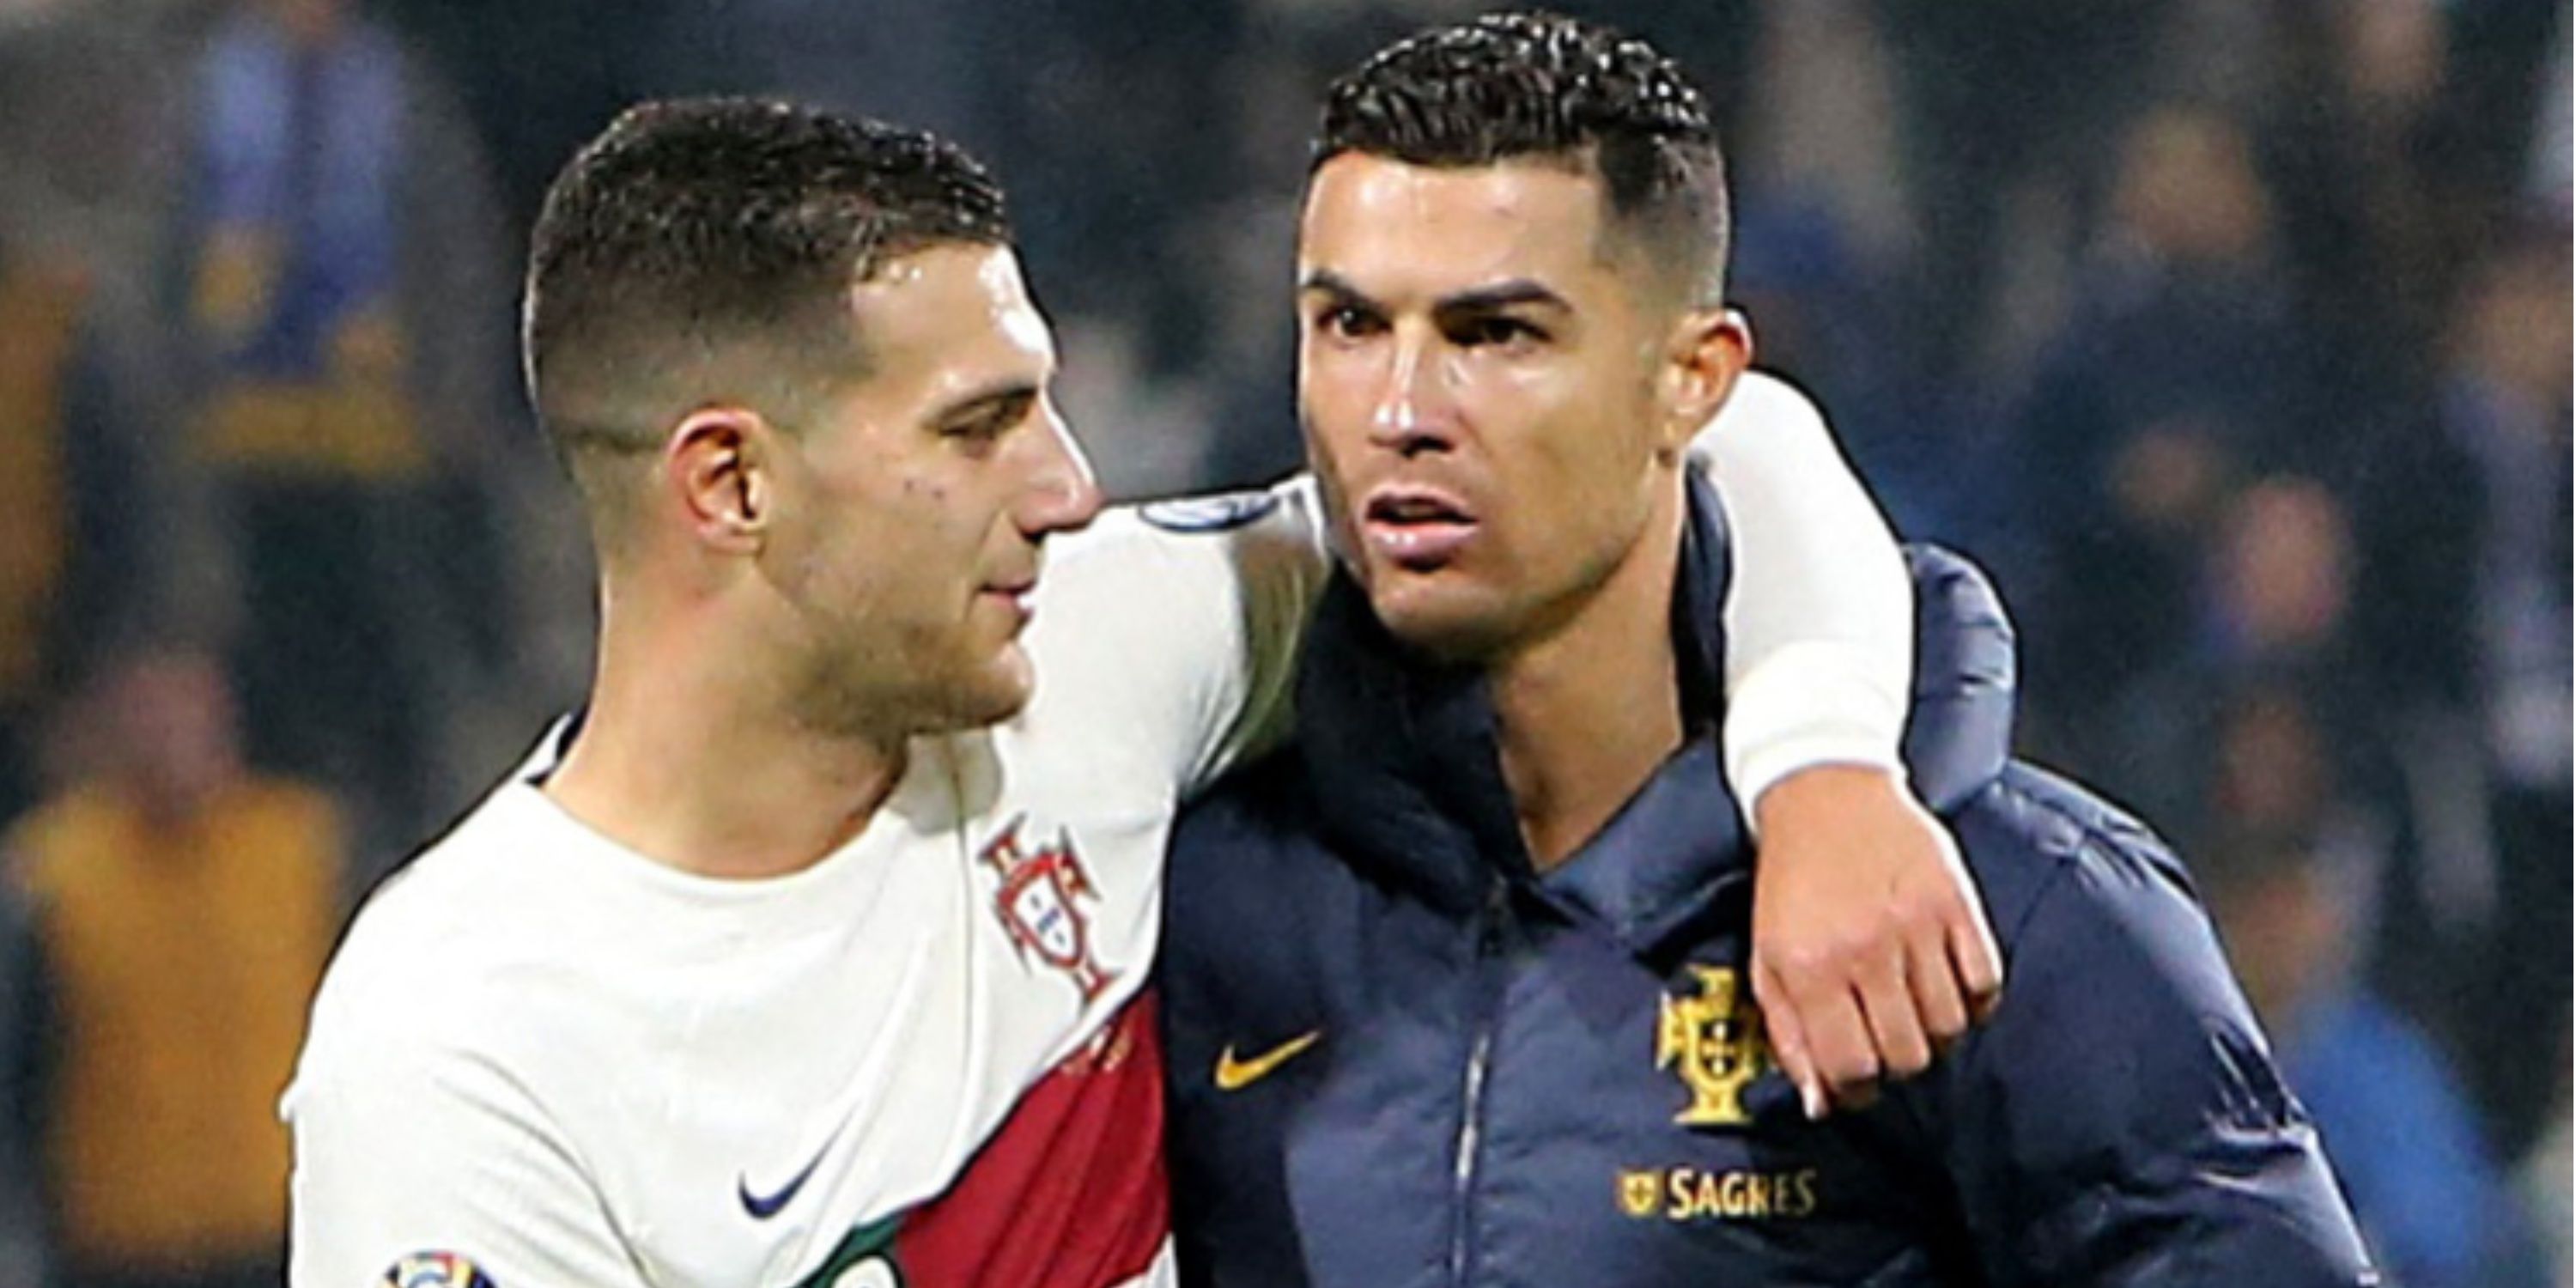 New footage shows what happened between pitch invader and Cristiano Ronaldo amid 'attack' claims